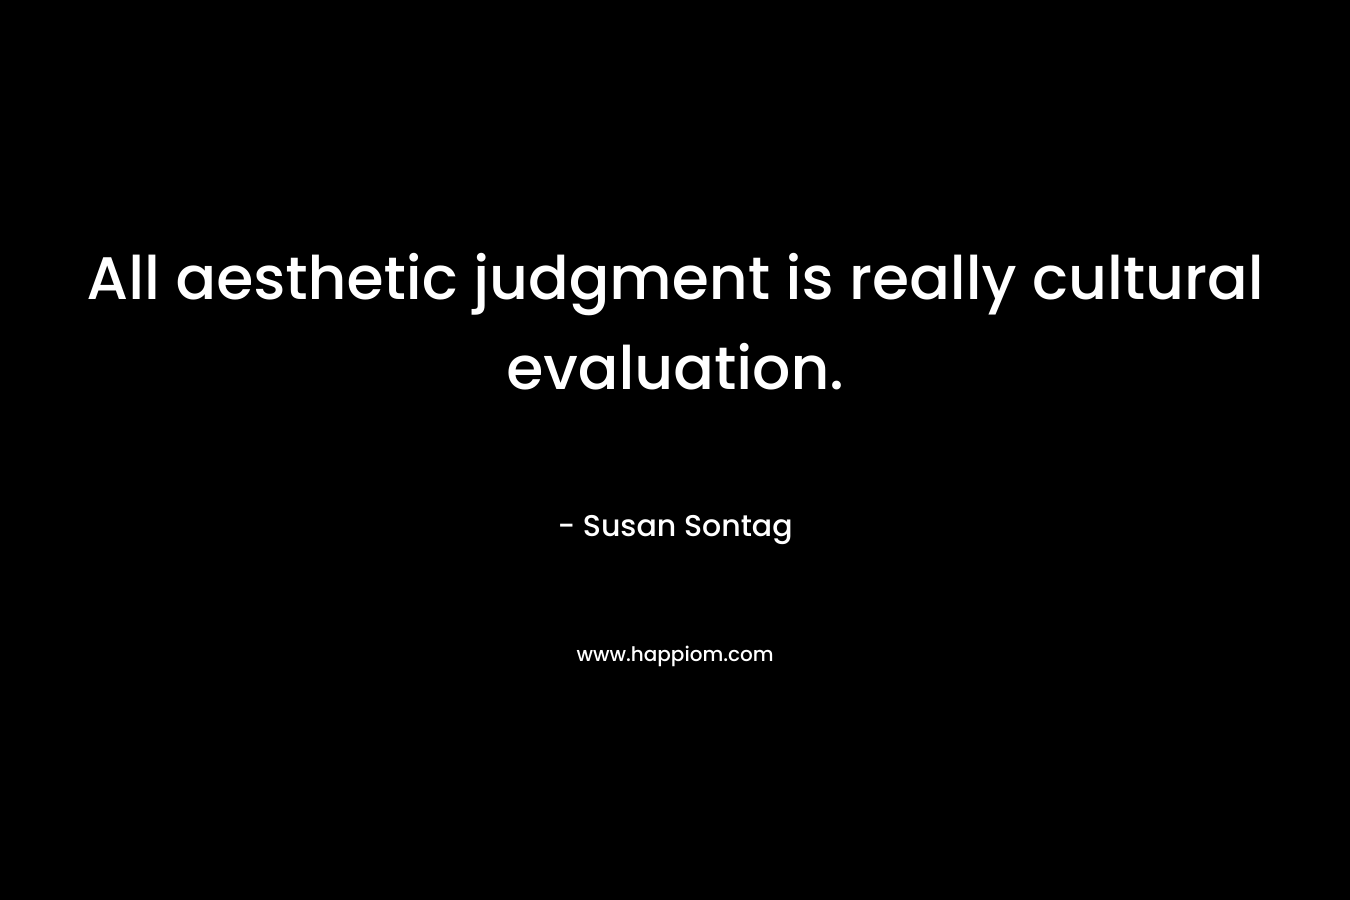 All aesthetic judgment is really cultural evaluation. – Susan Sontag